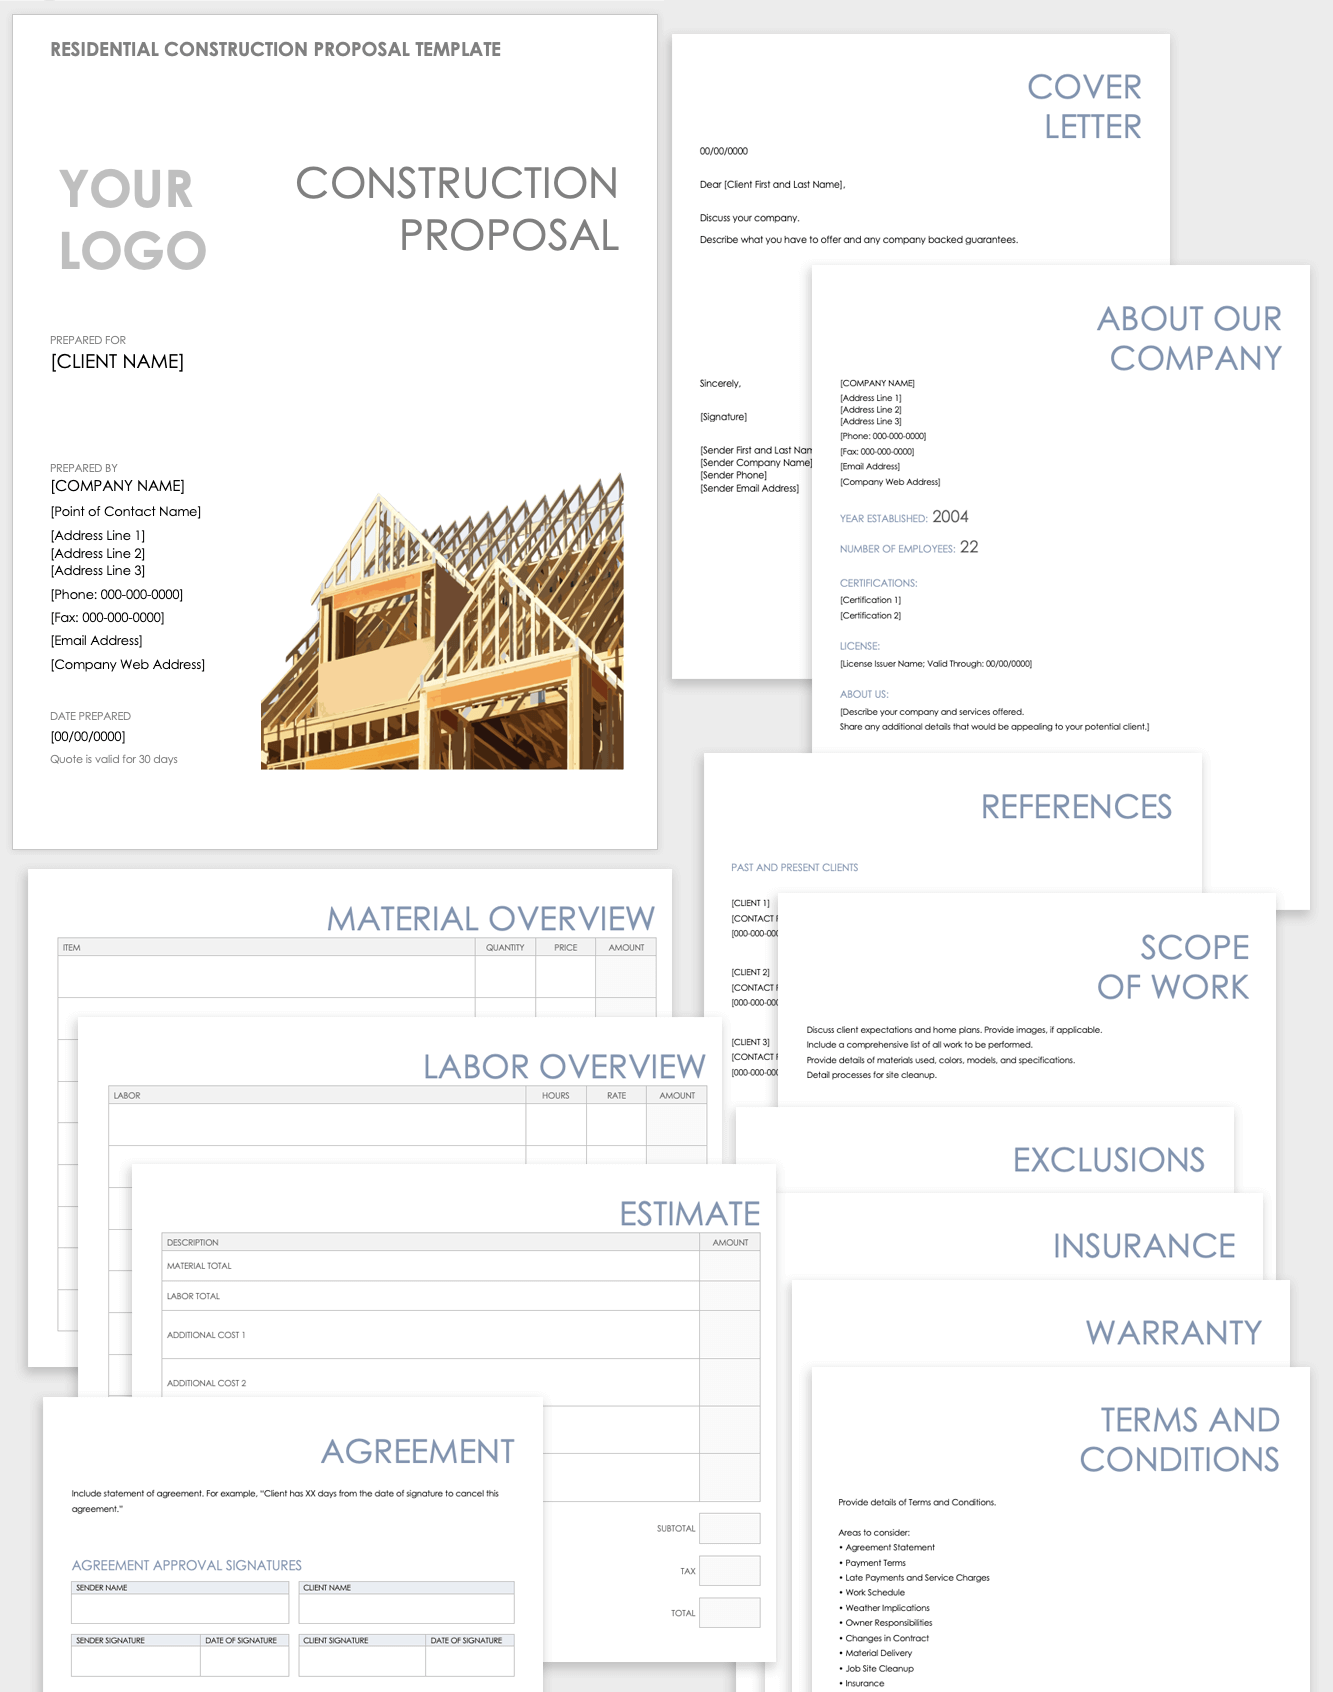 Residential Construction Proposal Template